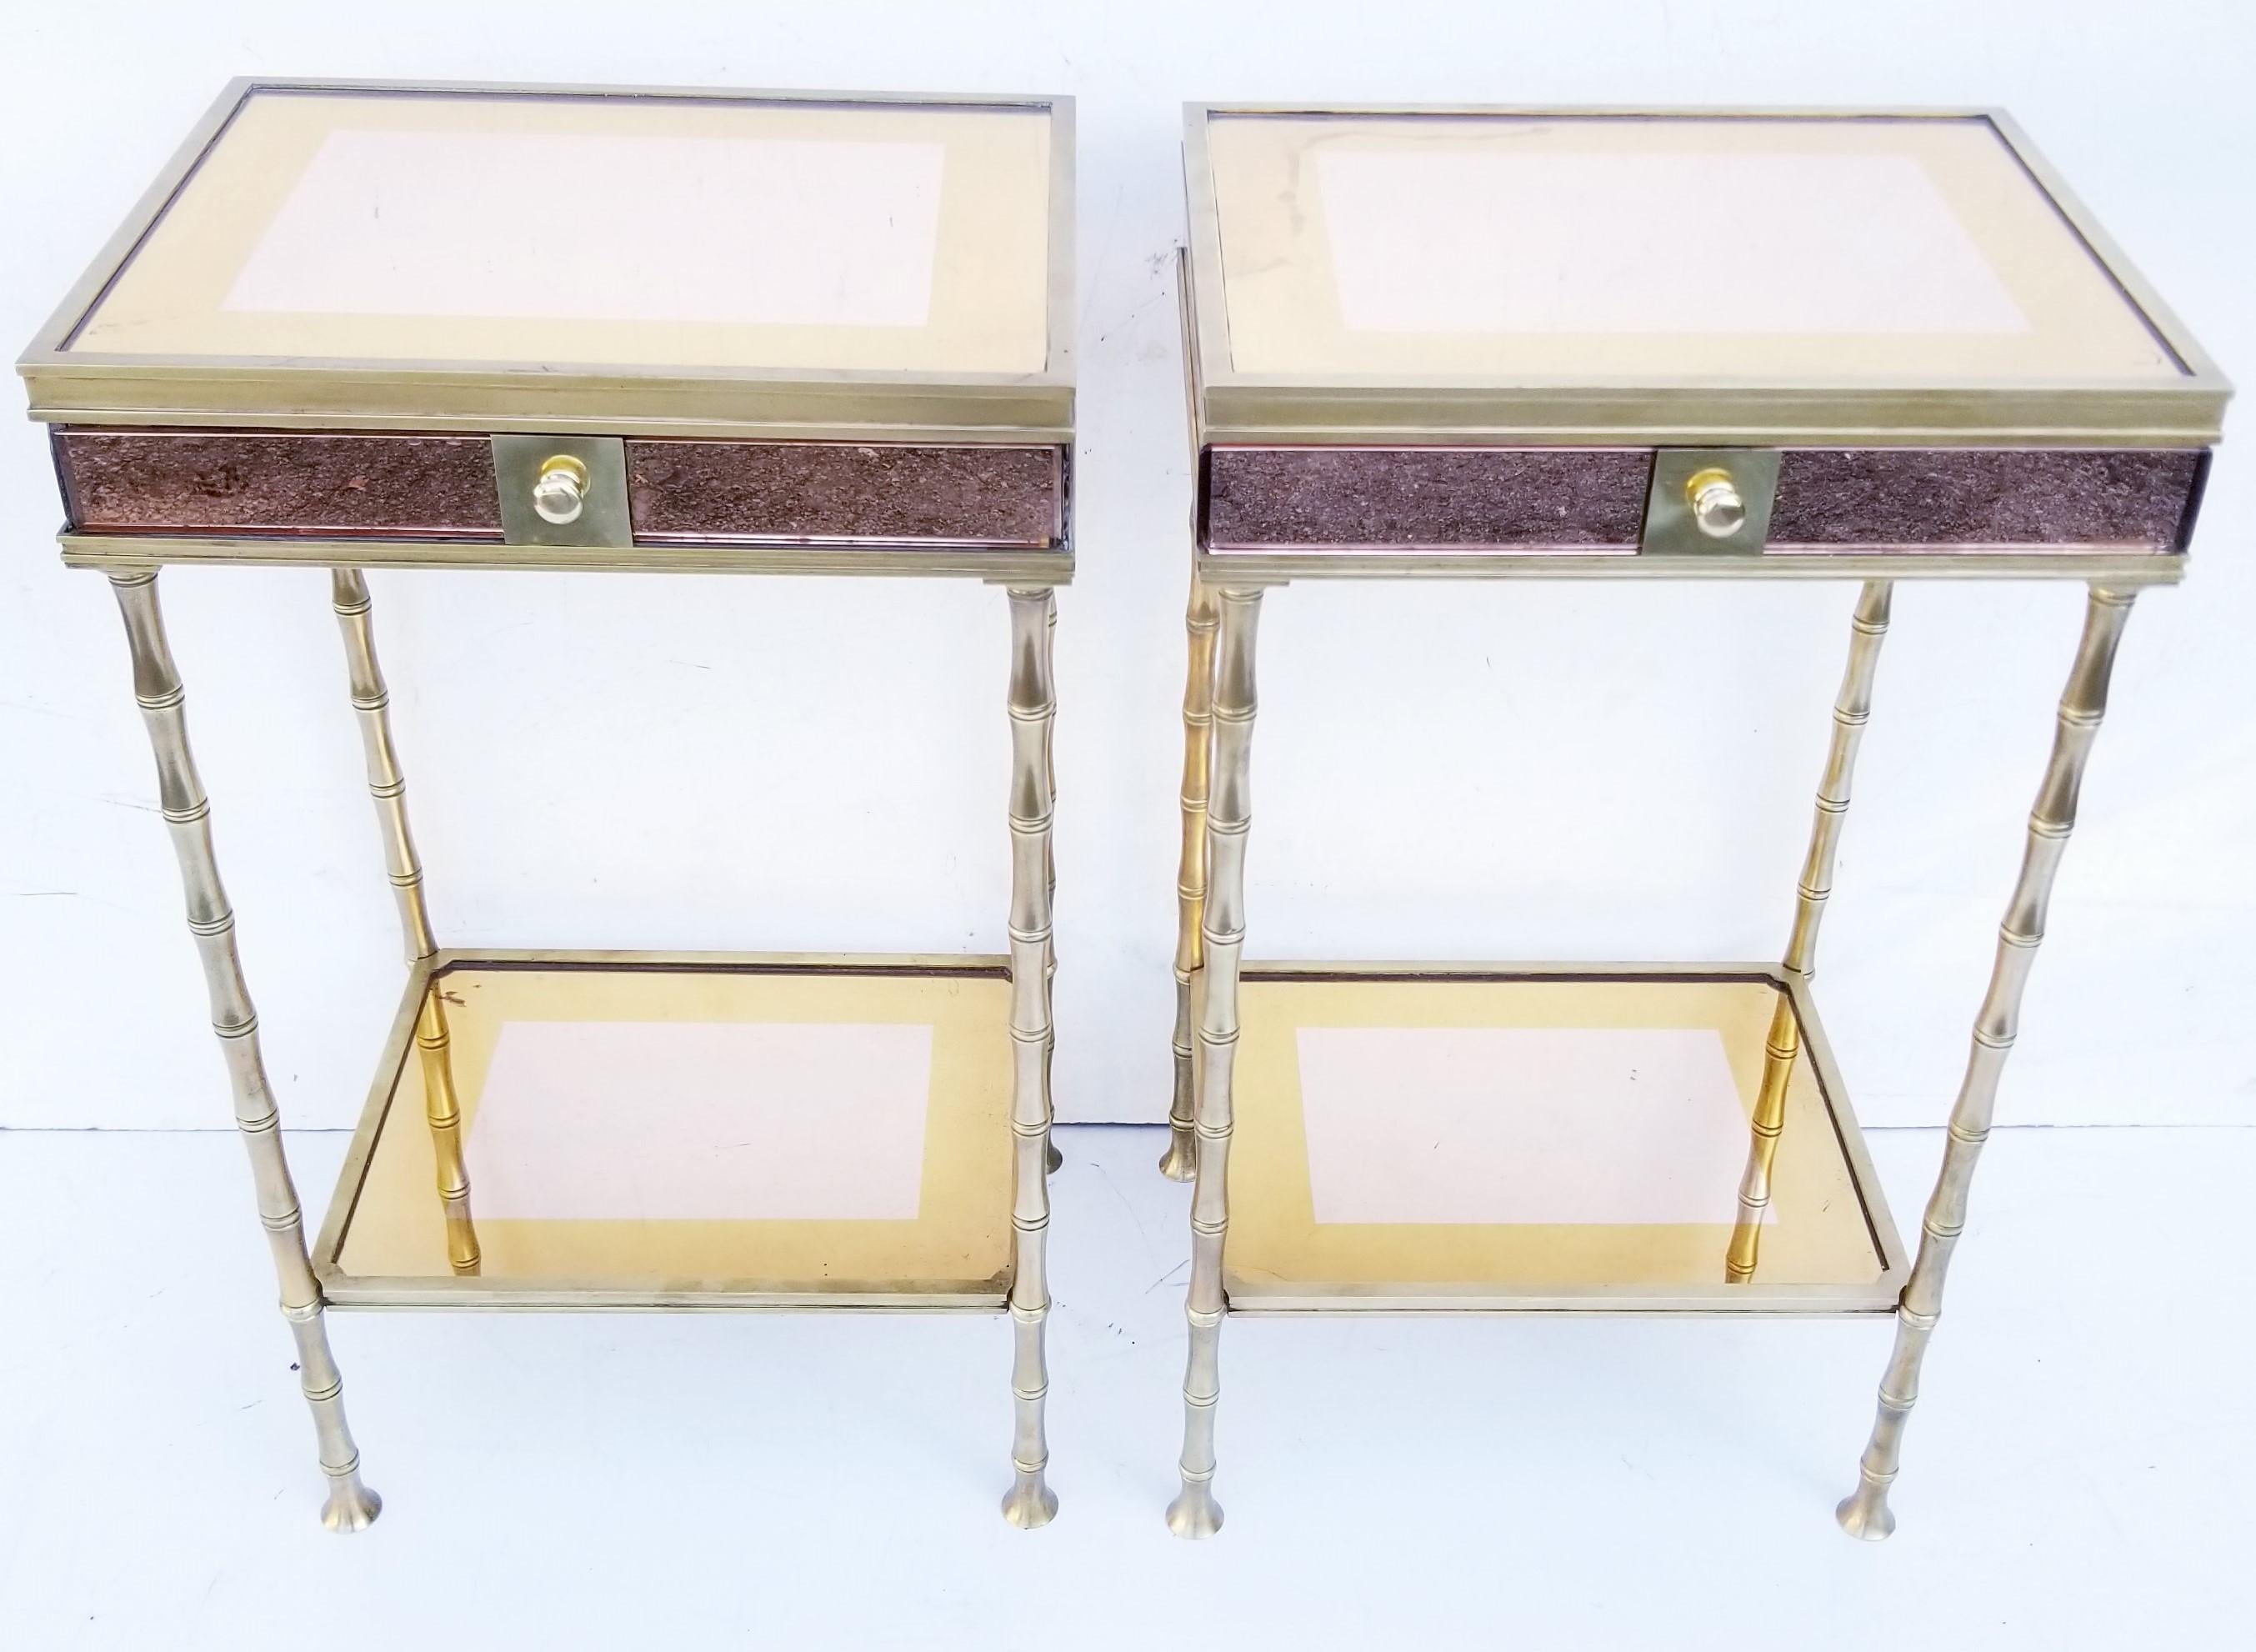 Pair of bronze and two-tone mirrors side table, superb quality, probably made by Maison Baguès.
1 drawer on the front.
Heavy and sturdy.
1st-tier height: 7 in.